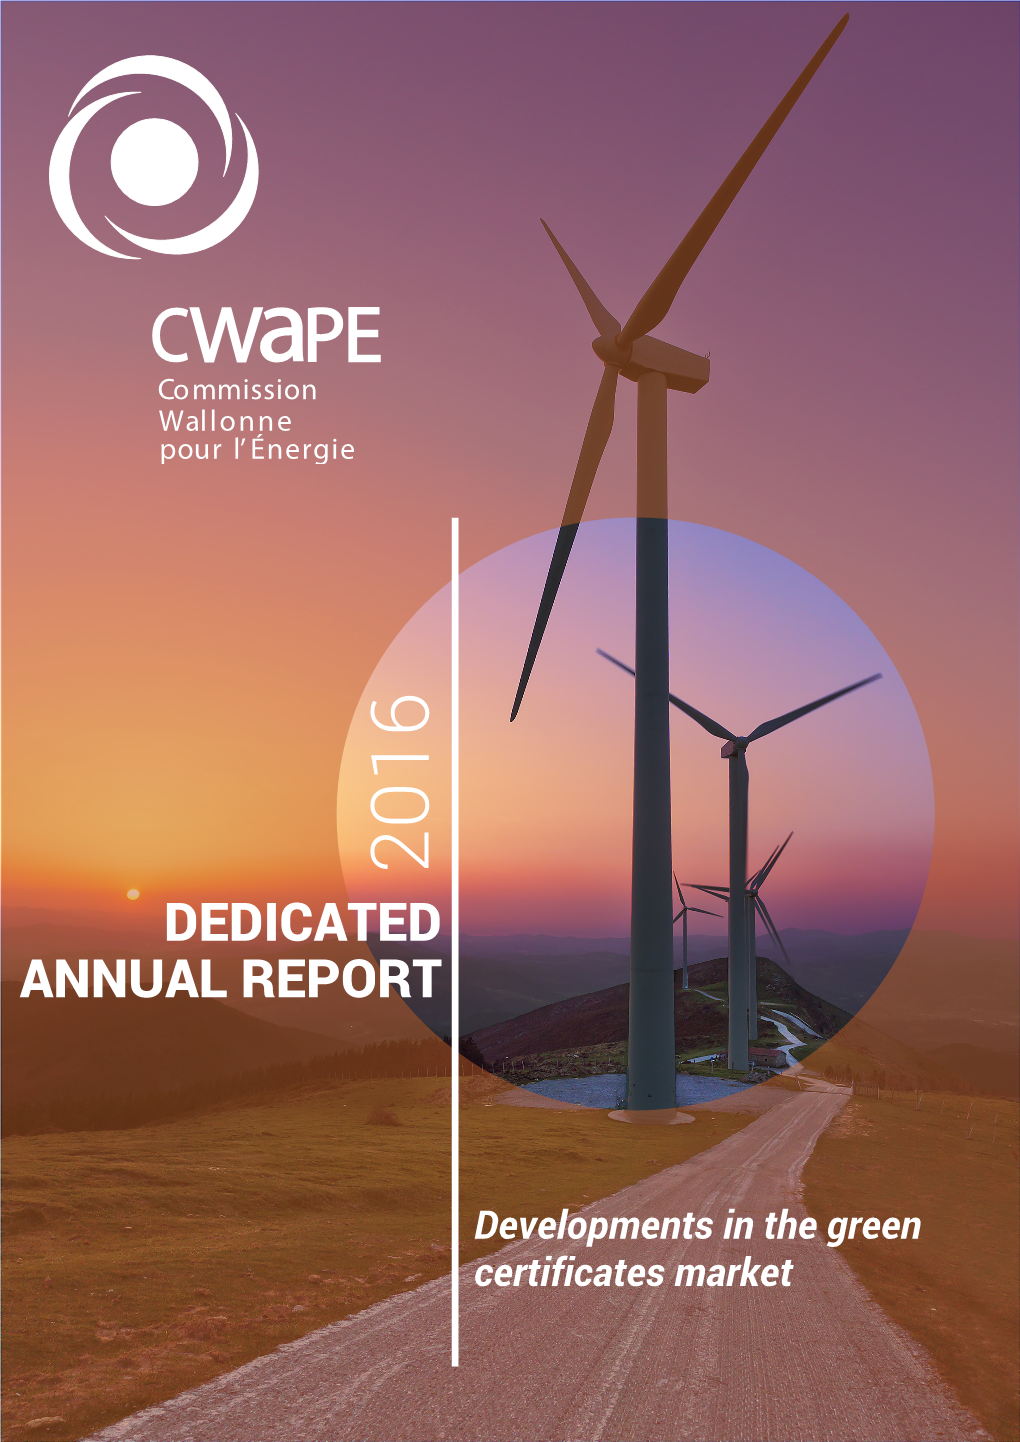 Dedicated Annual Report for 2016 Is Defined in Article 29 of the Order of 30 November 2006 on the Promotion of Electricity Generated from Renewable Energy Sources